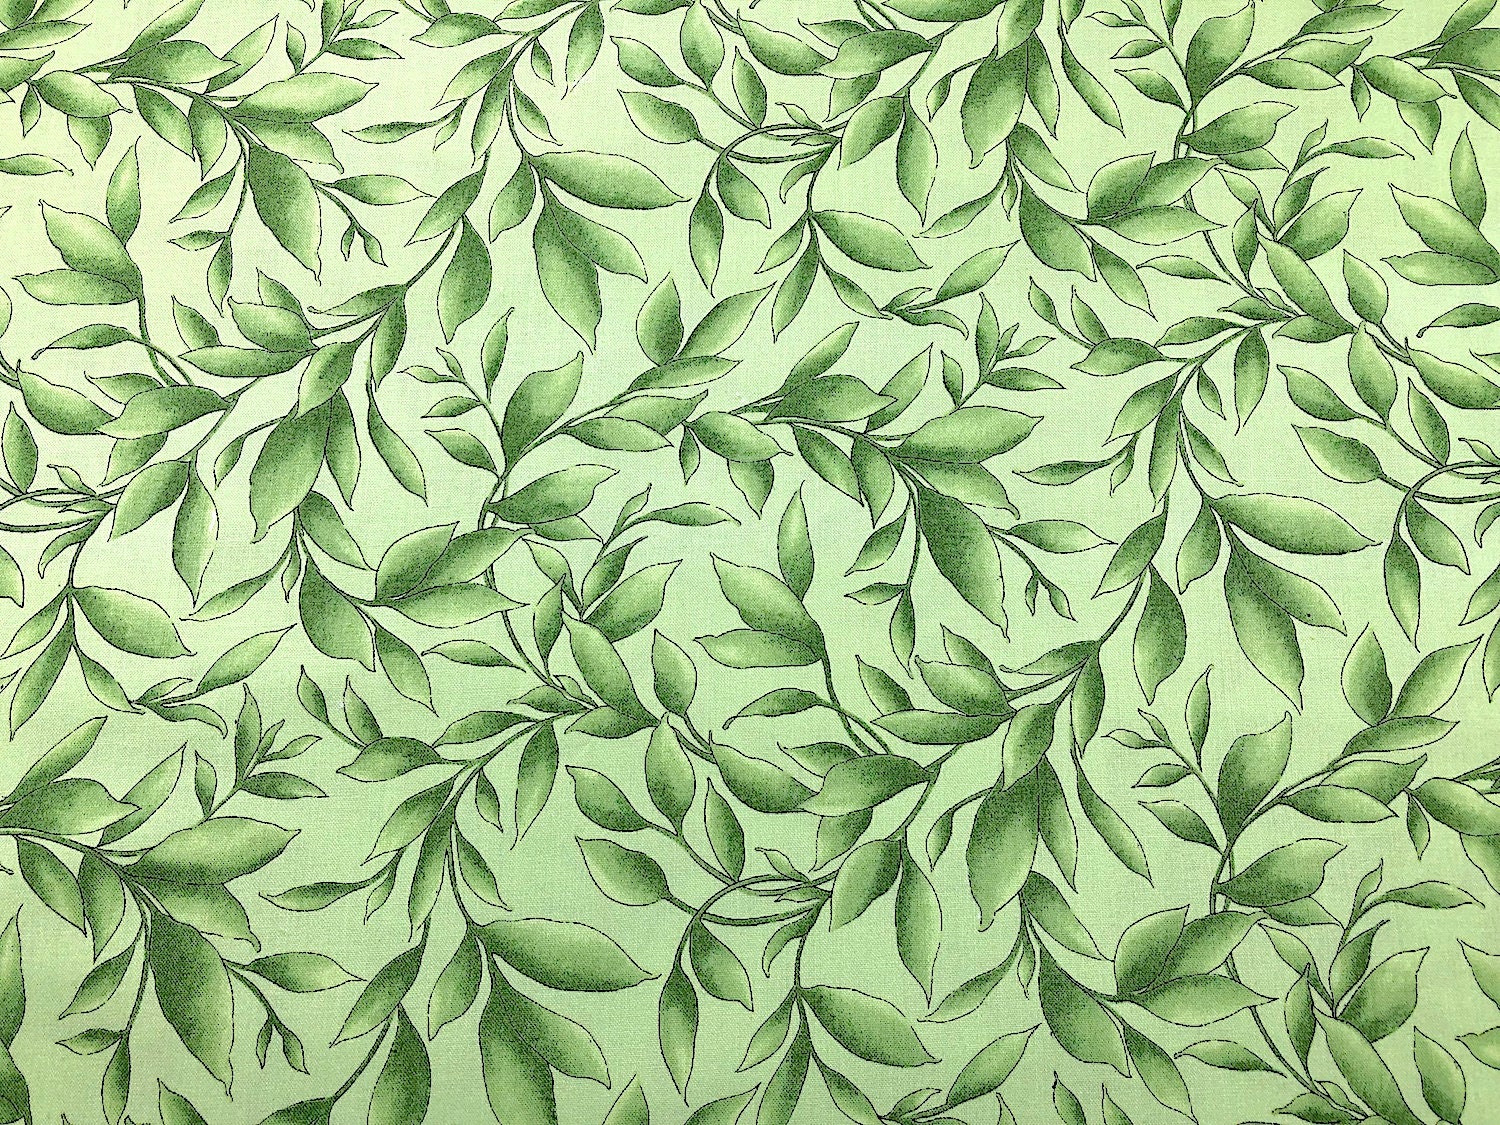 This light green cotton fabric is covered with dark and light green leaves.